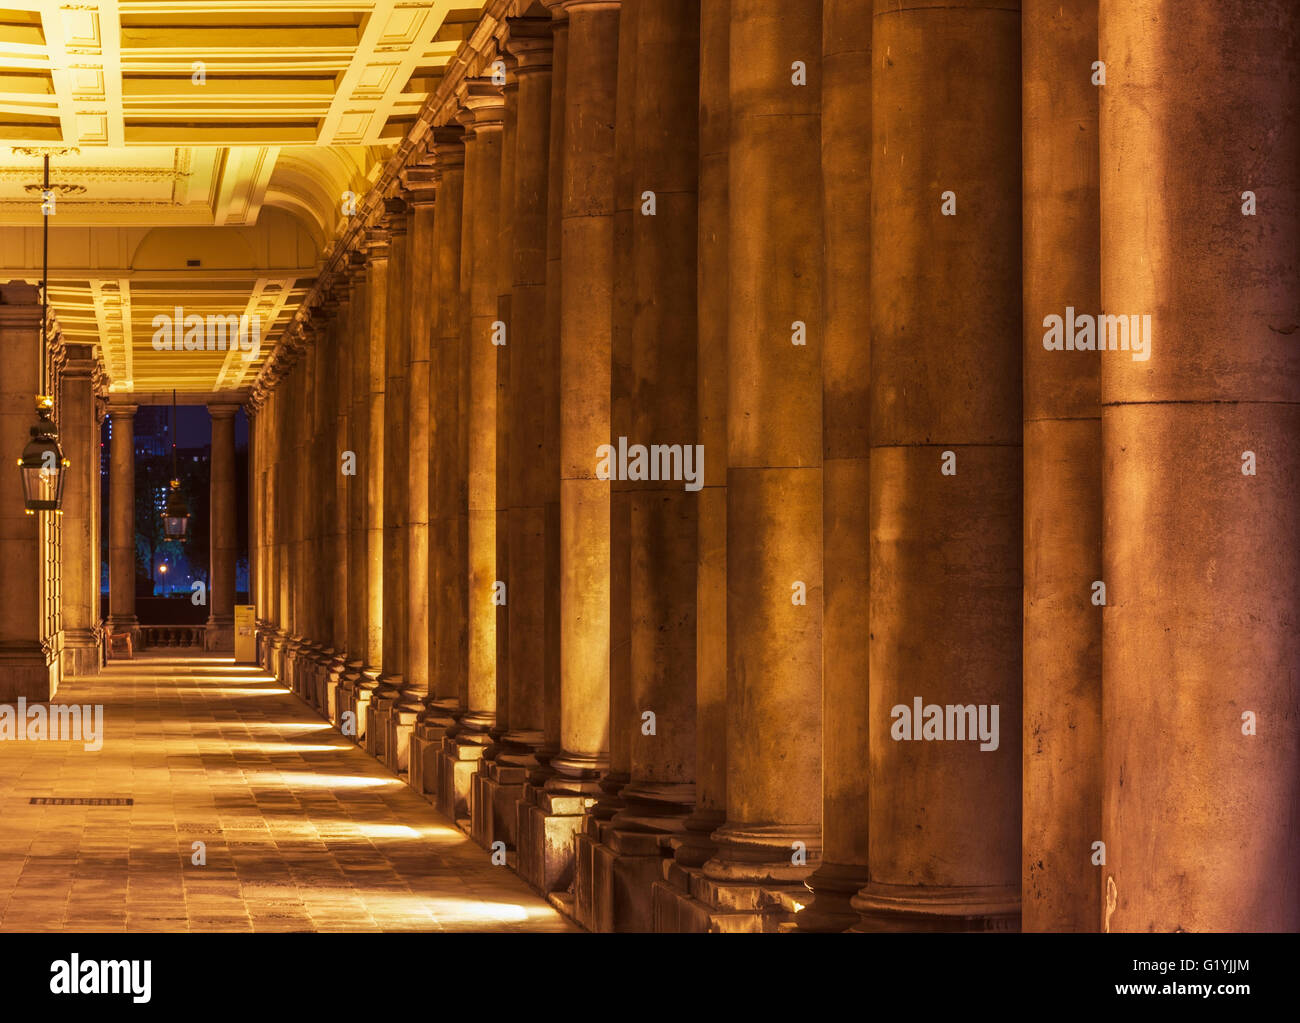 Colonnade in University of Greenwich, London at night Stock Photo